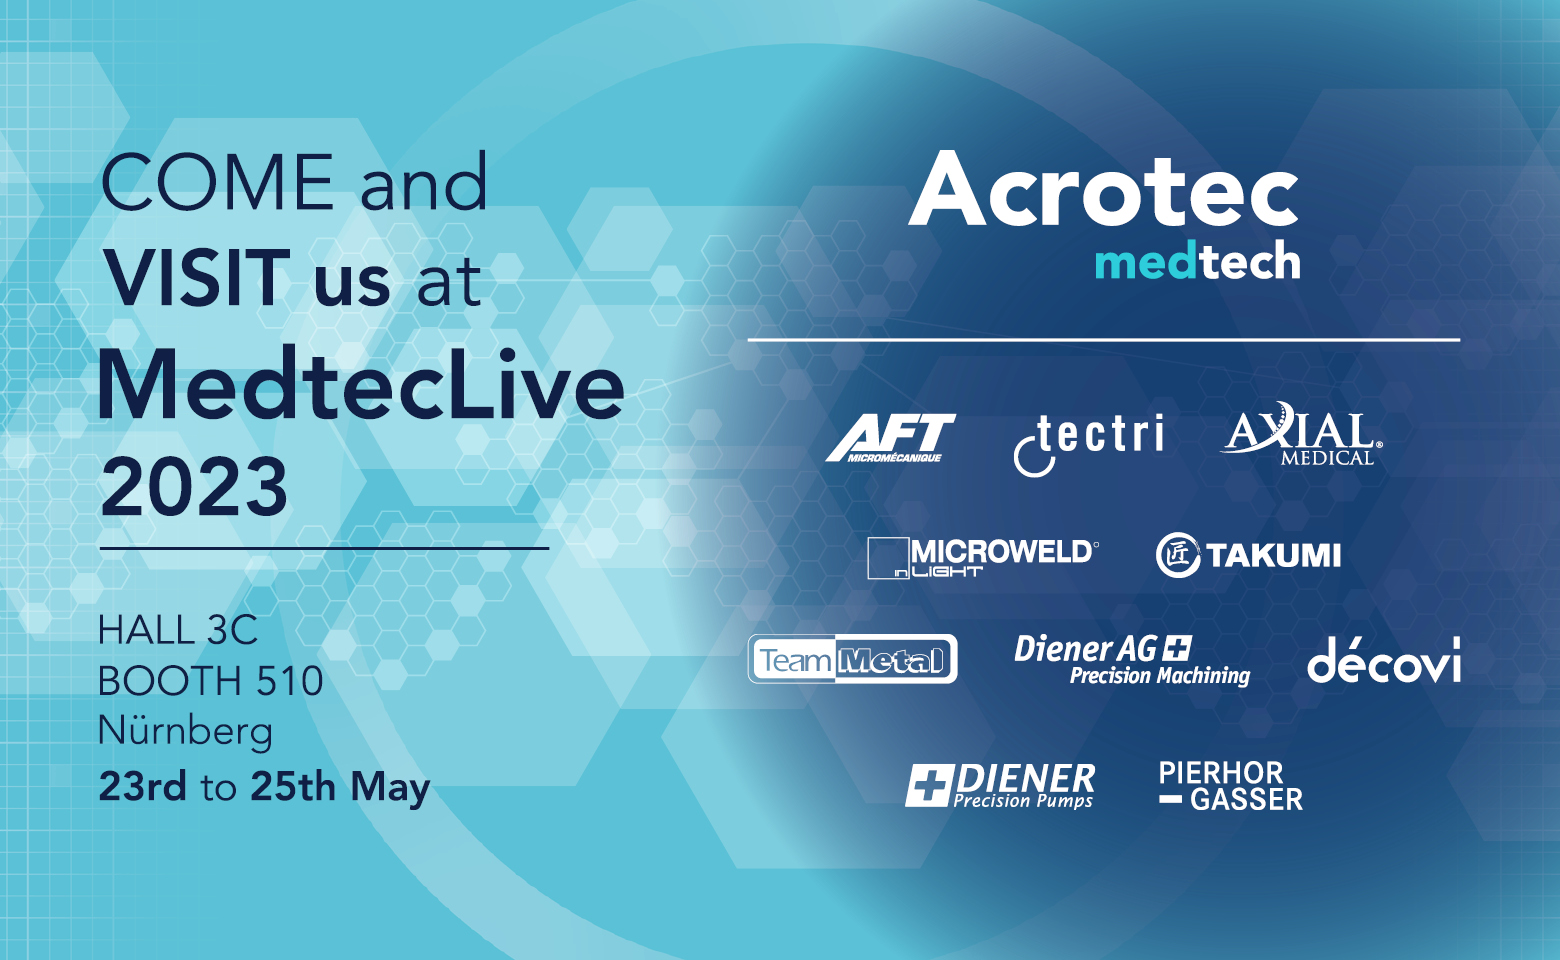 Acrotec Medtech and Tectri will exhibit at MedtecLive 2023